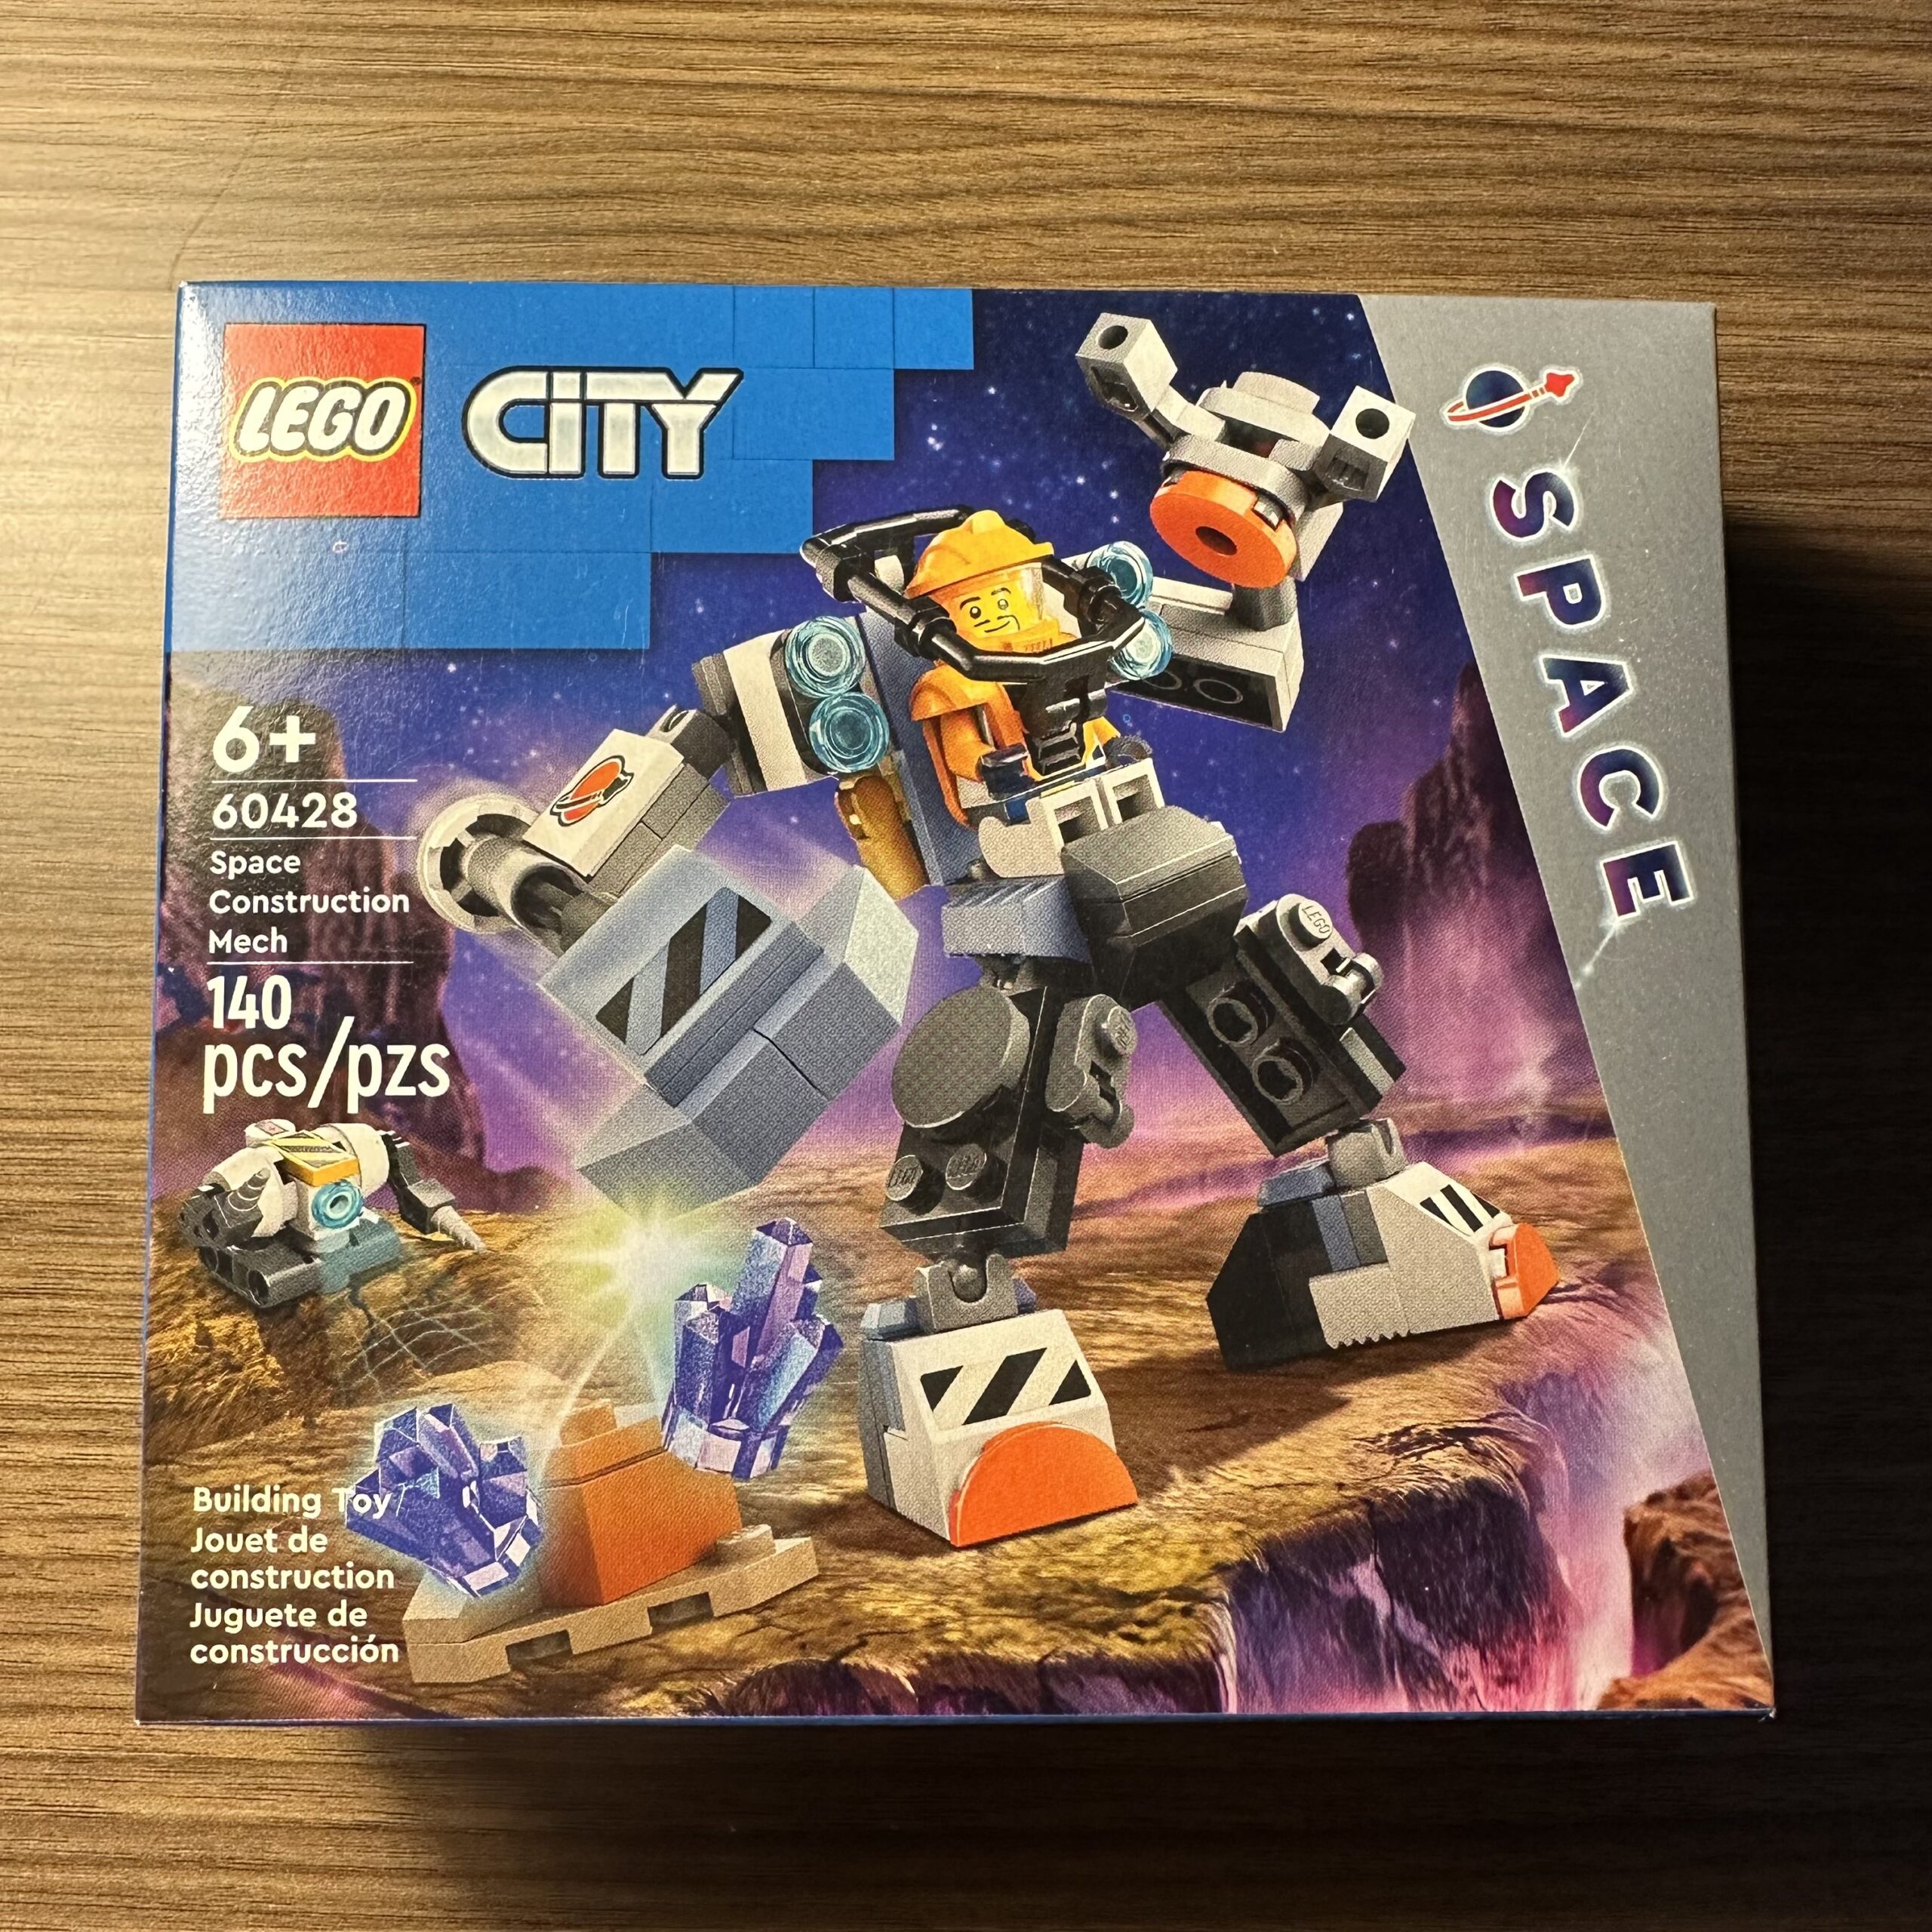 Box for LEGO City Space set 60428 Space Construction Mech. Box depicts an orange astronaut in a gray mech pounding some purple crystals off of some rocks. A small robot with two drill arms is in the background.